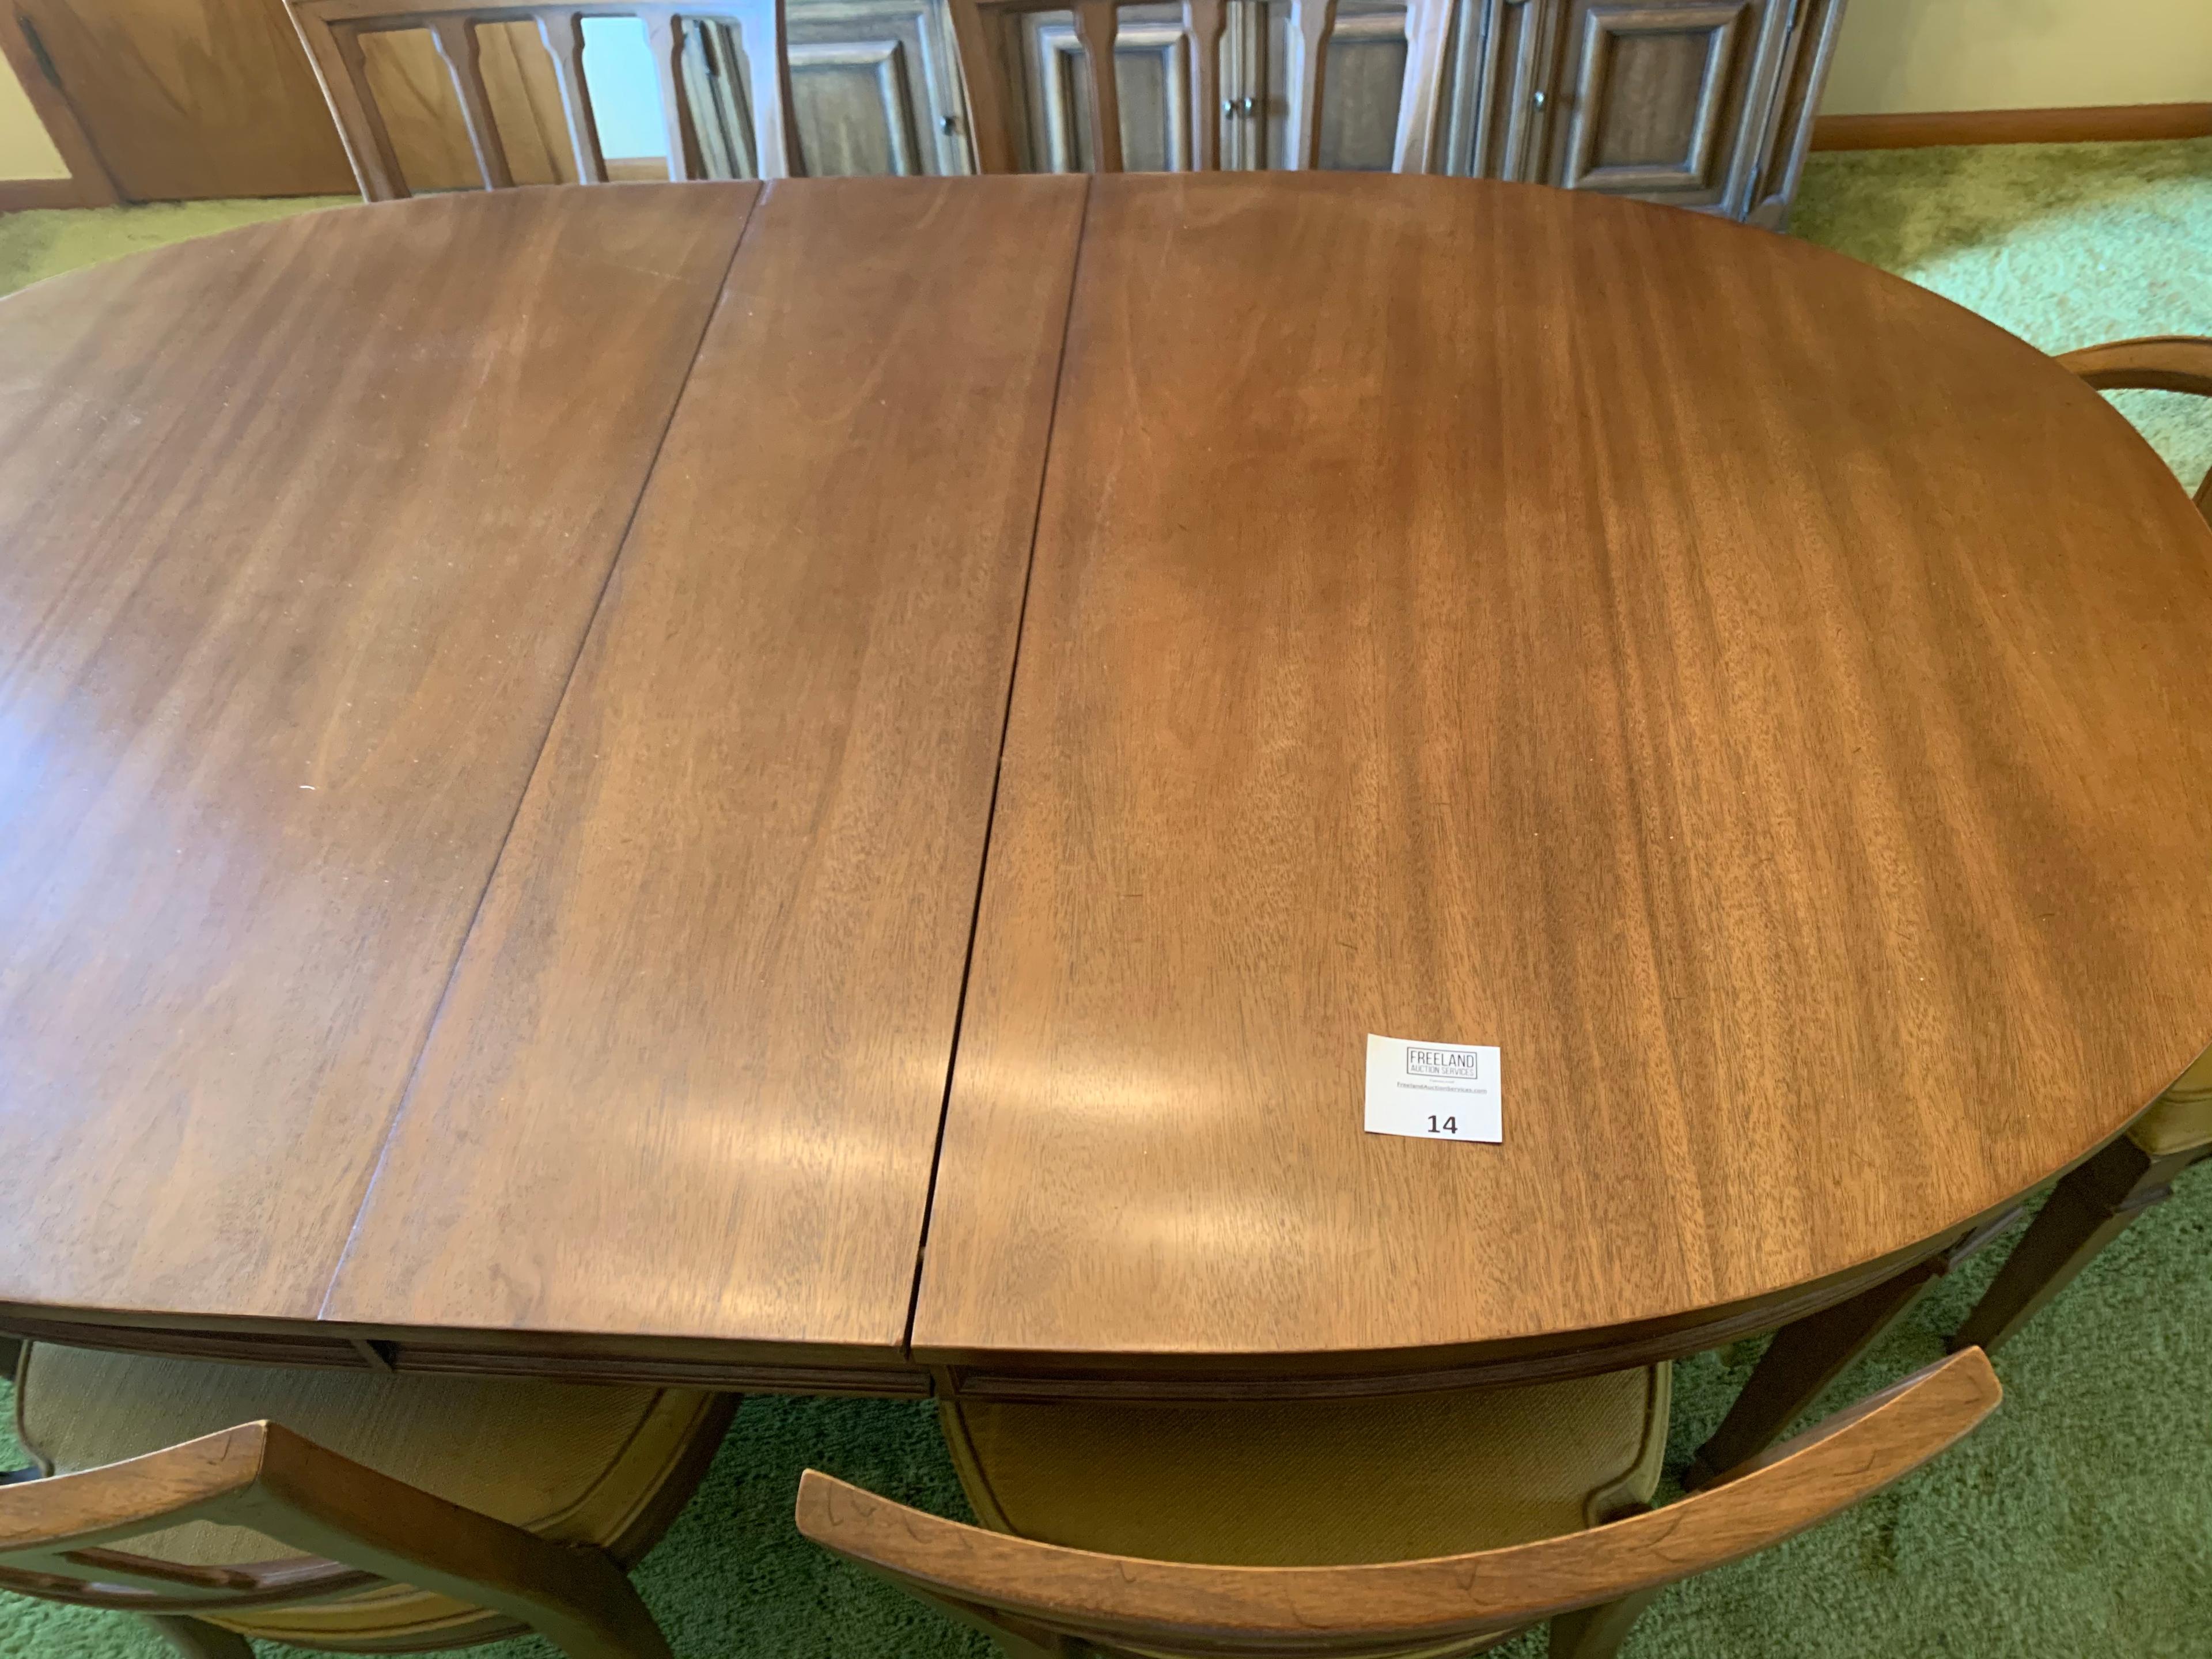 Drexel Super Nice Mid-century Dining Room Table With 6 Chairs